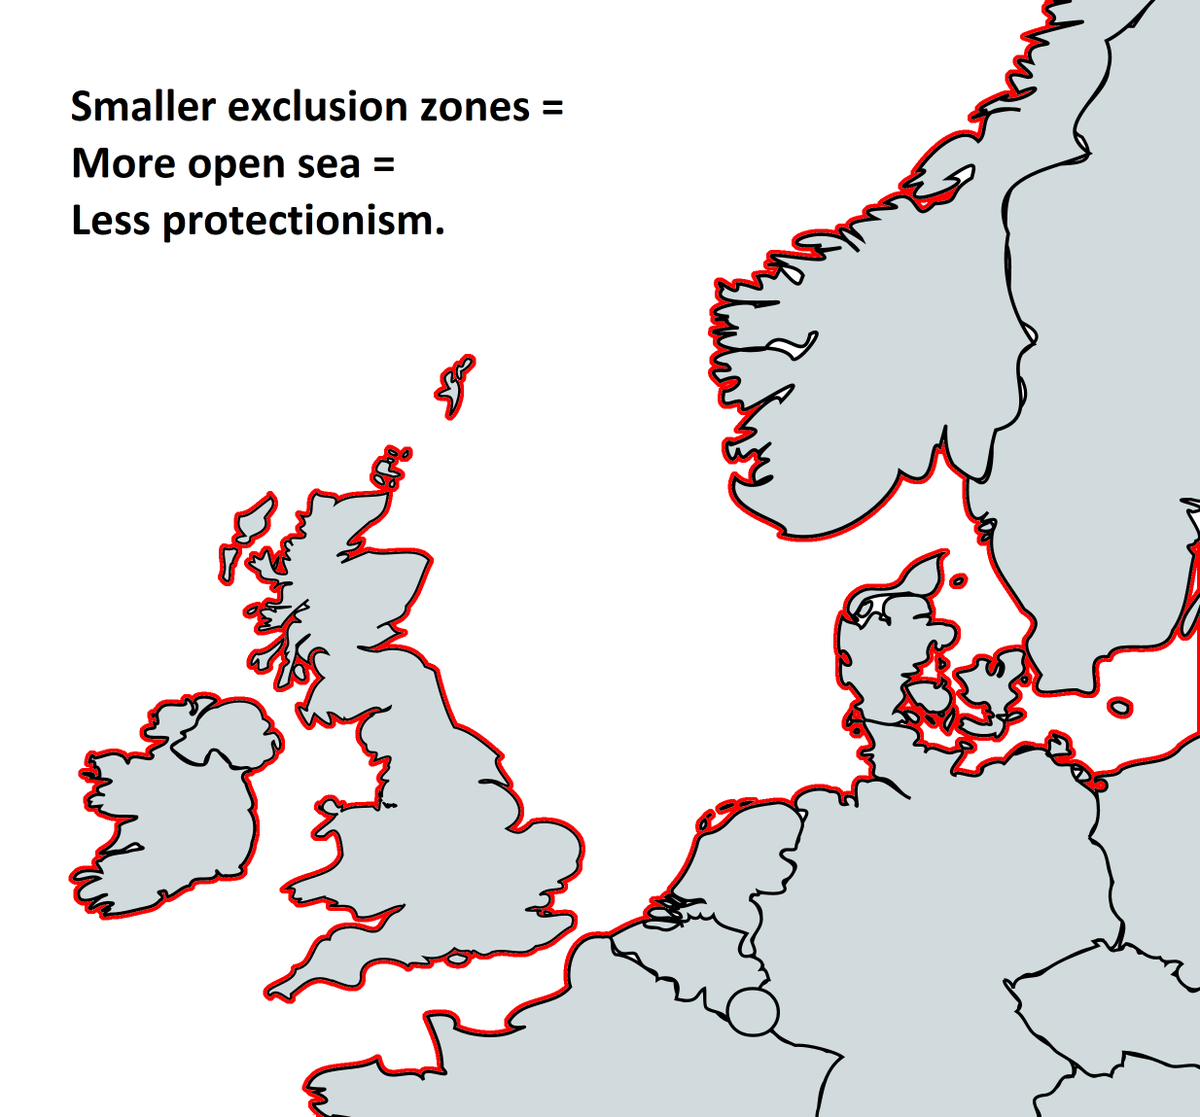 2. Fishing limits are a protectionist trade off between In-shore fishing deep sea fishing. The bigger the exclusion zone countries set for in-shore fishing, the more deep sea fishing is impacted.